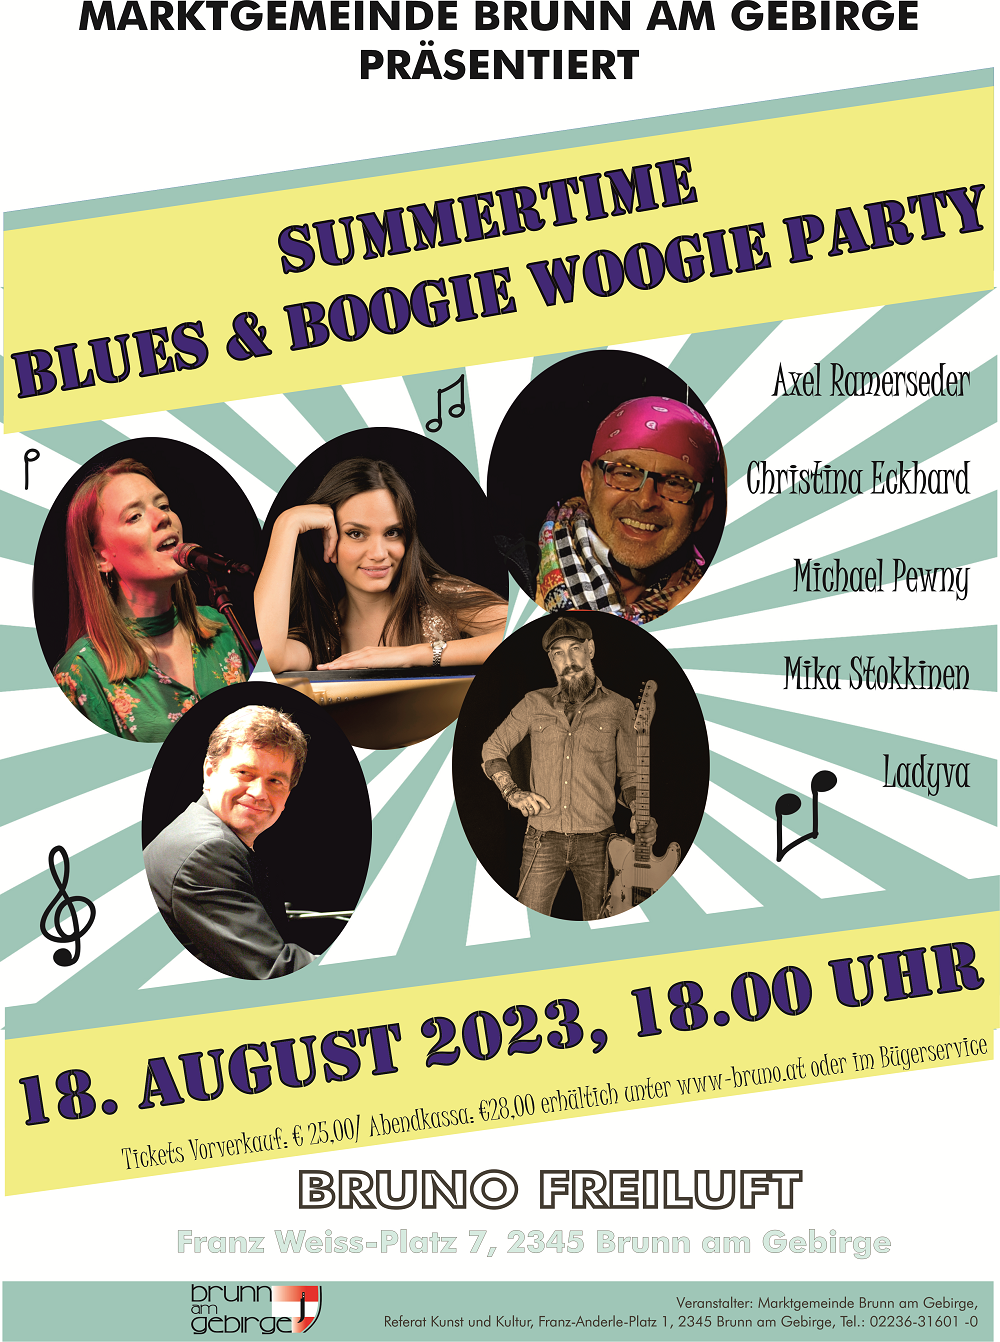 Summertime Blues & Boogie-Woogie Party